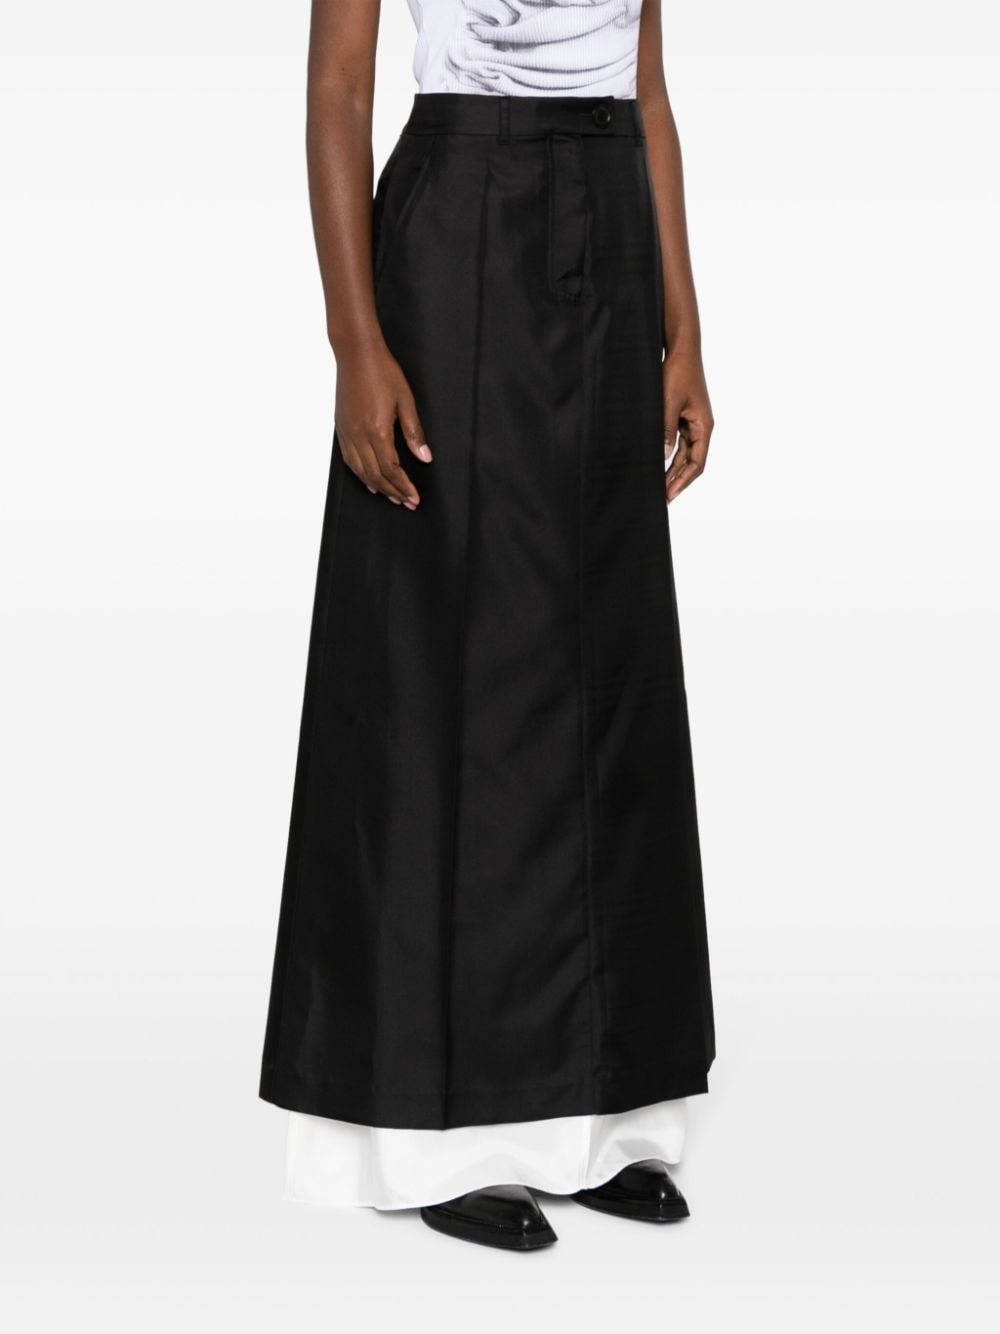 double-layer A-line maxi skirt - 3